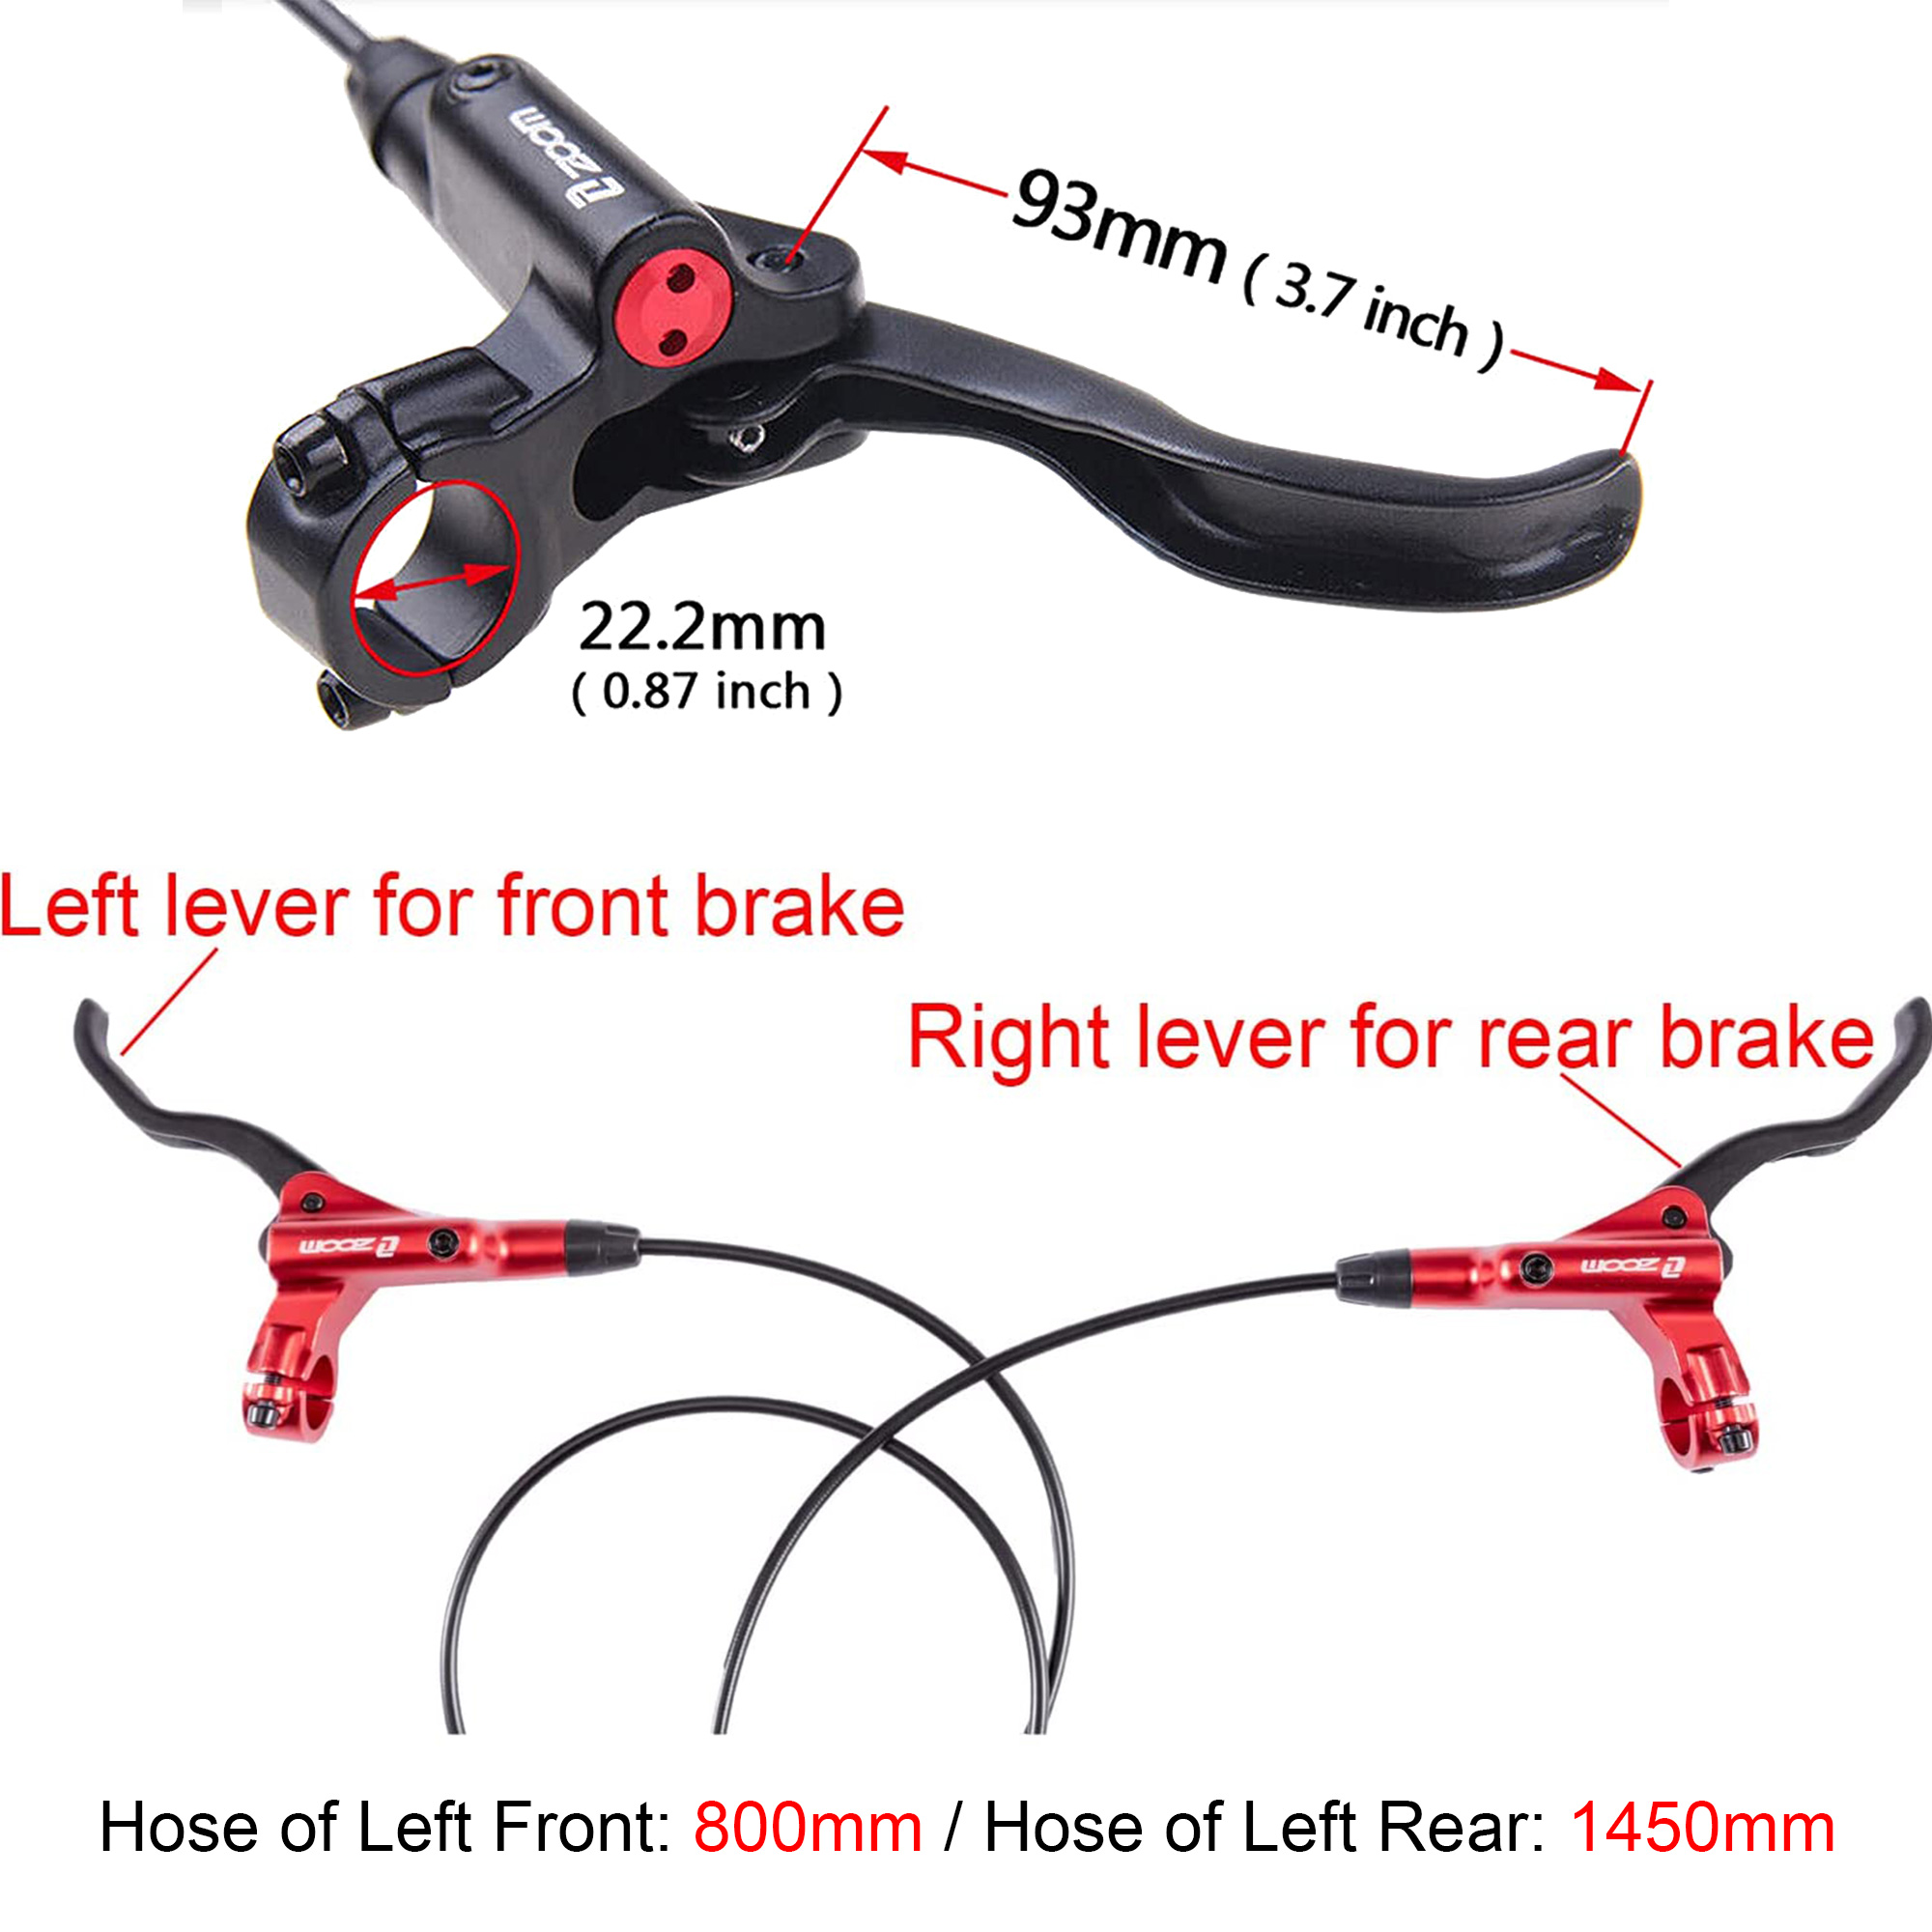 BUCKLOS  Mountain Bike Disc Brake Set, Hydraulic Disc Brakes with MTB Rotor 180mm 203mm, is PM Mount Adapter Bicycle Brake Performance Upg